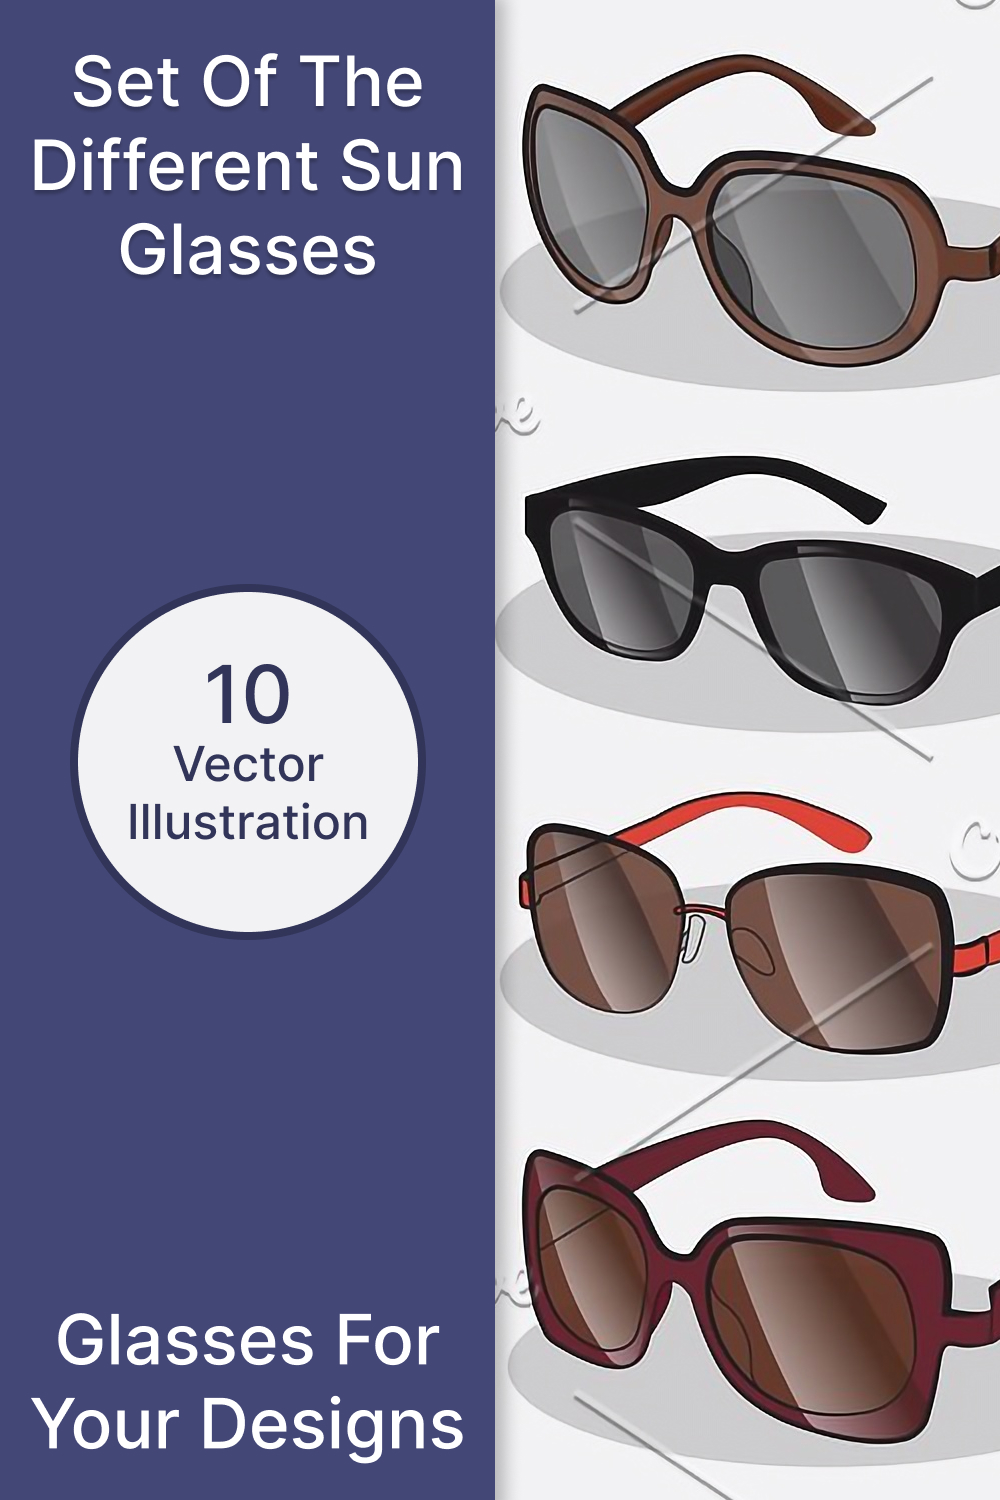 Set Of The Different Sun Glasses Pinterest Cover.